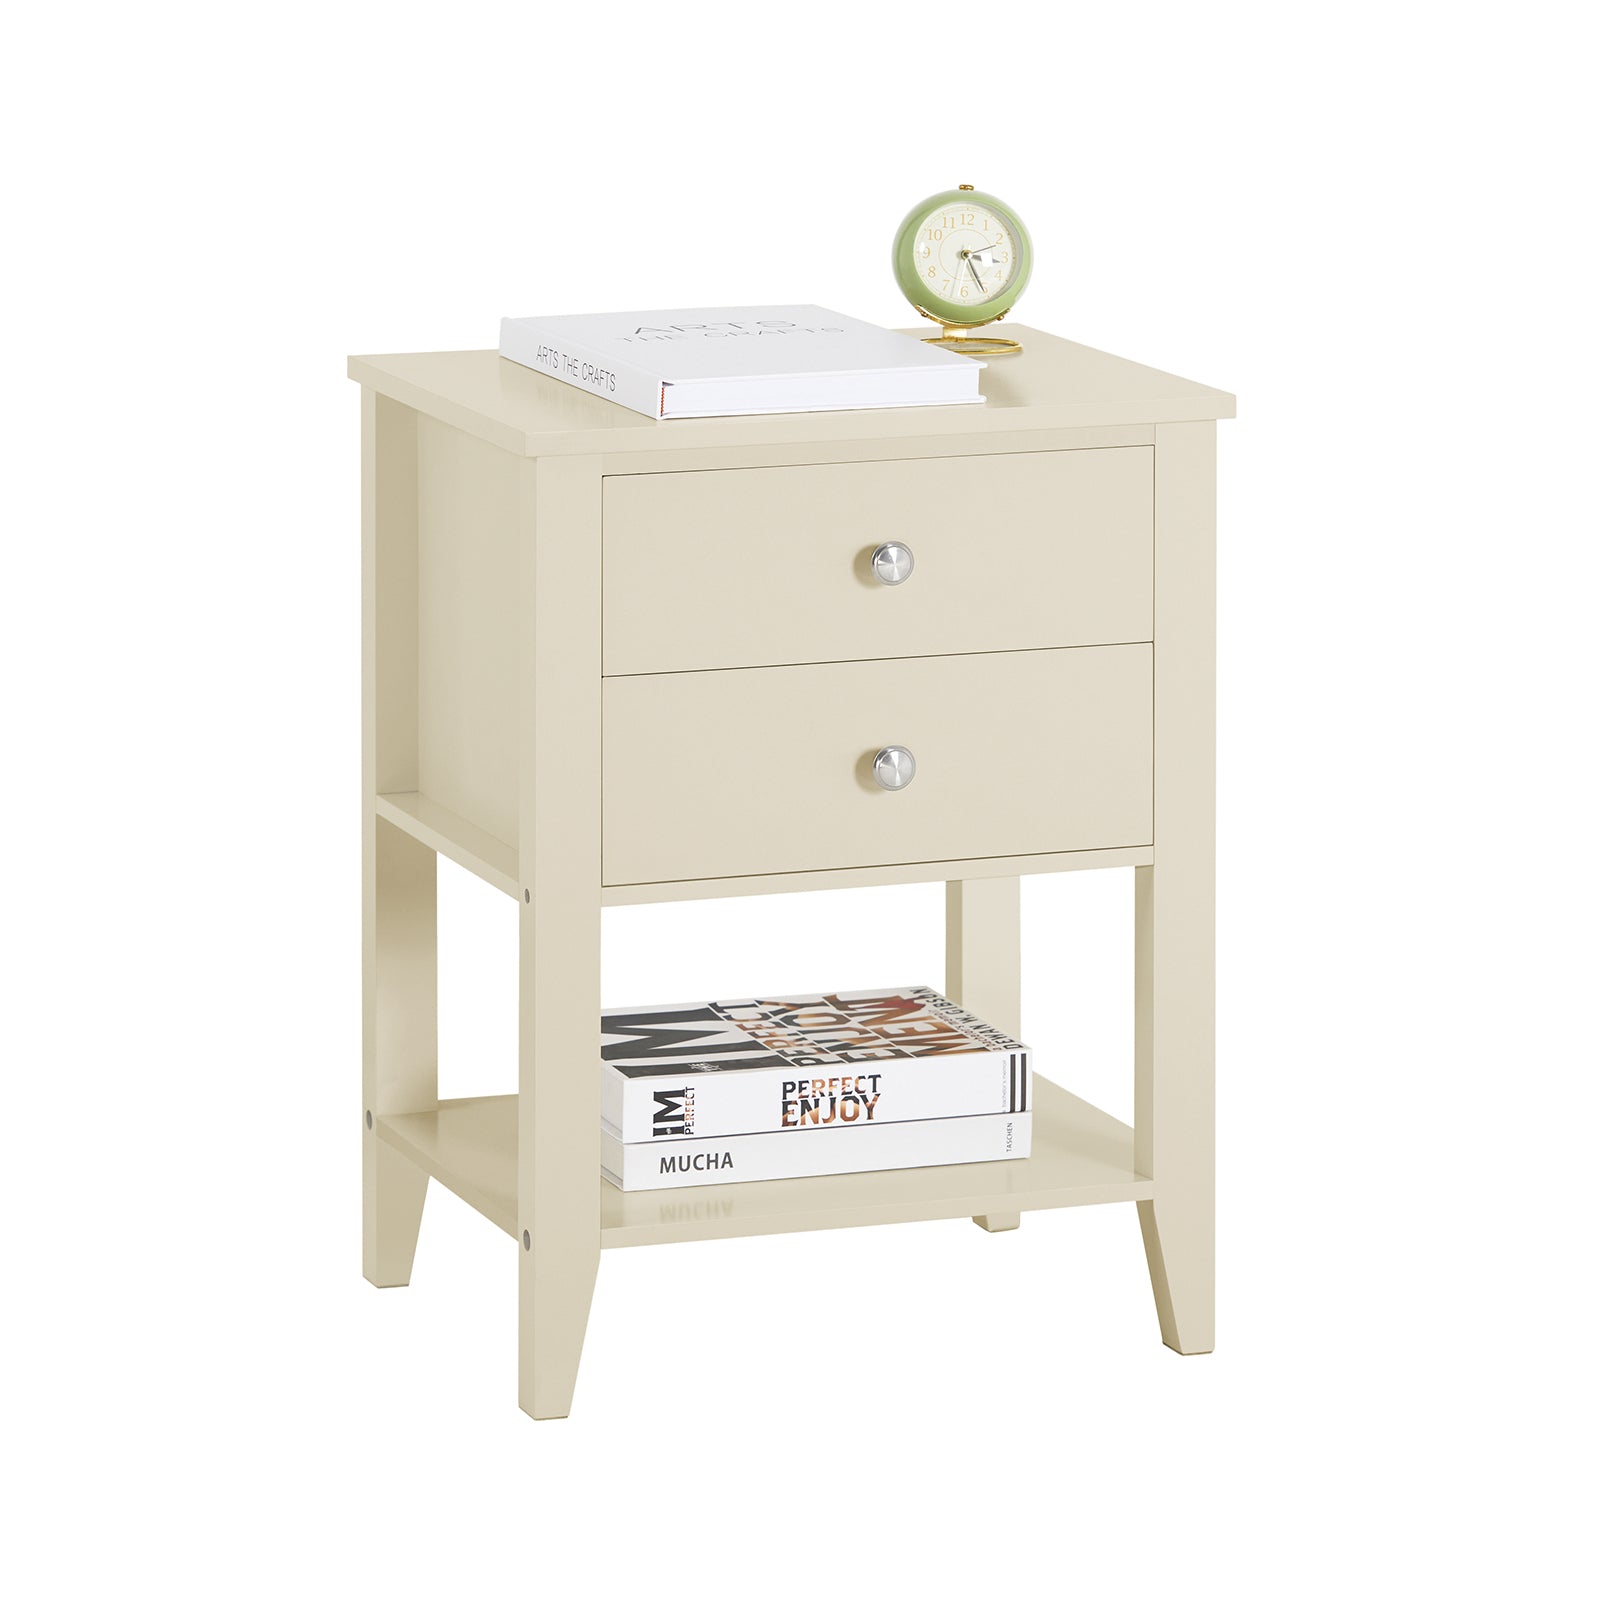 SoBuy FBT114-MI Lamp Table Bedside Table Night Stand End Table with 1 Drawers and 1 Shelf